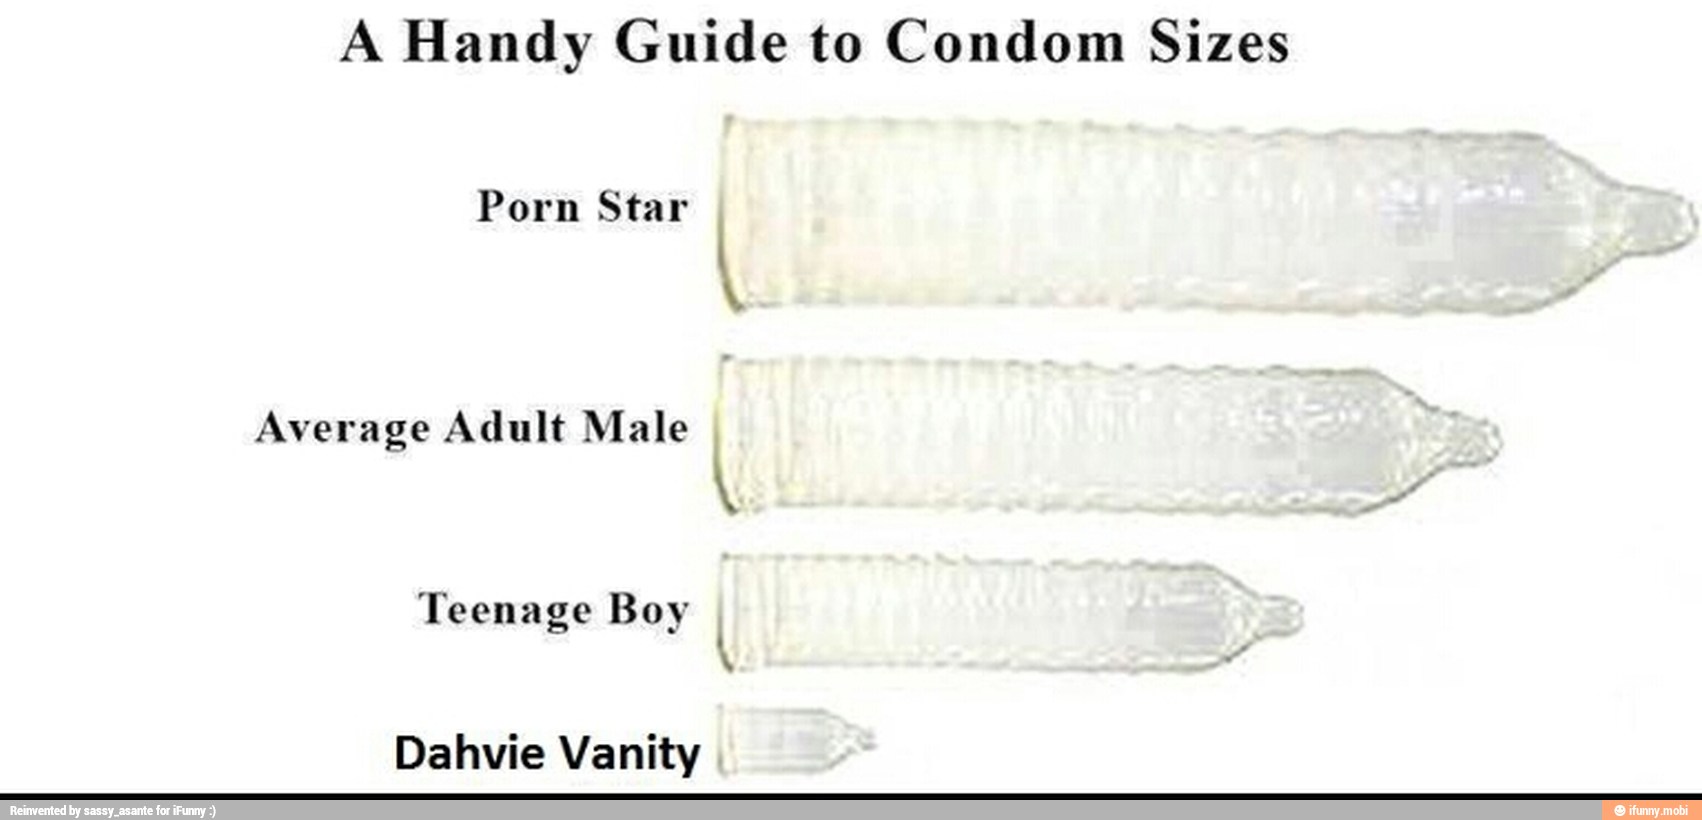 A Handy Guide to Condom Sizes.